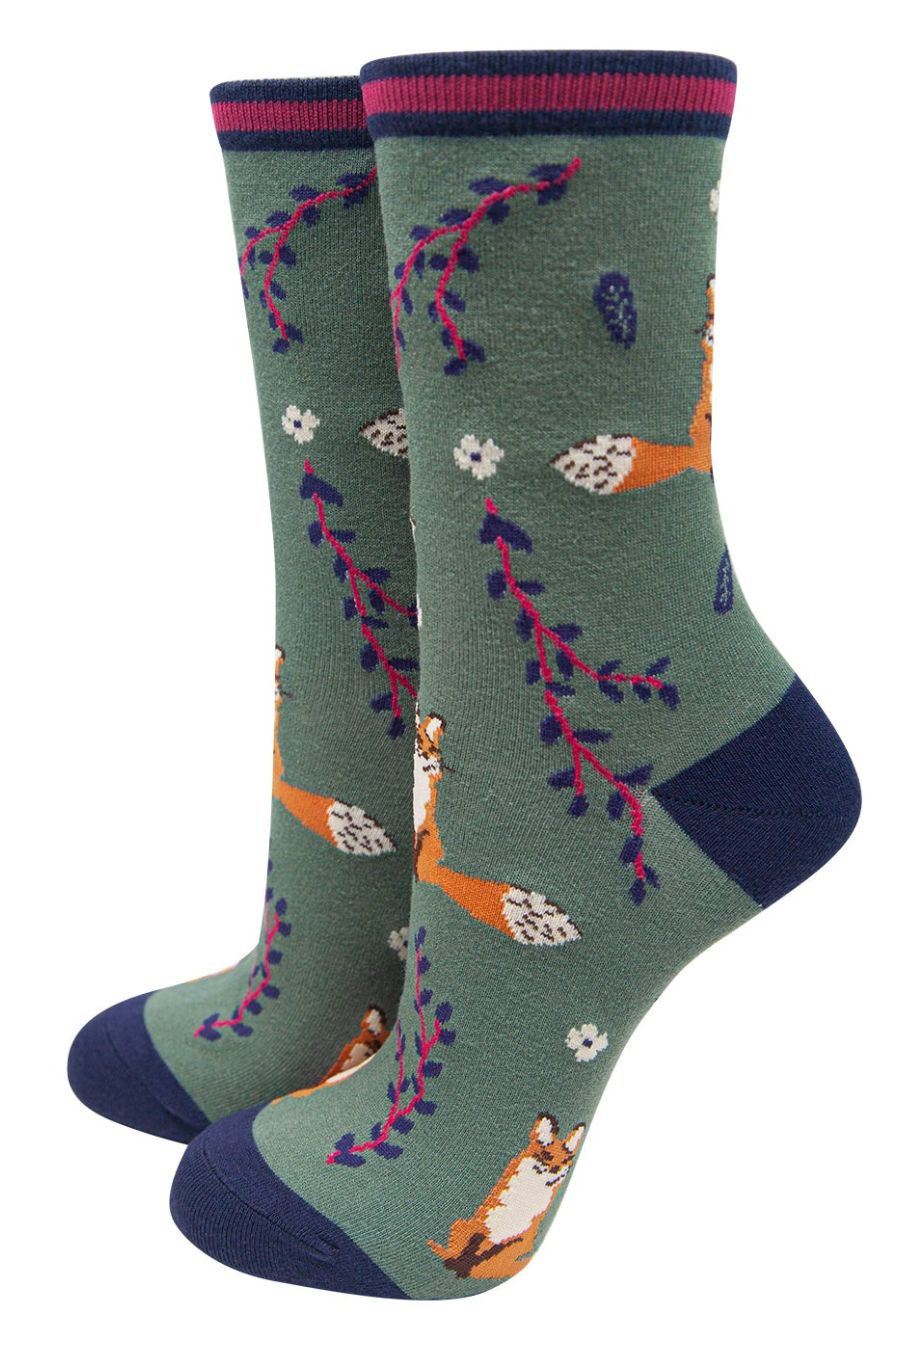 sage green ankle socks with red foxes, leaves and flowers